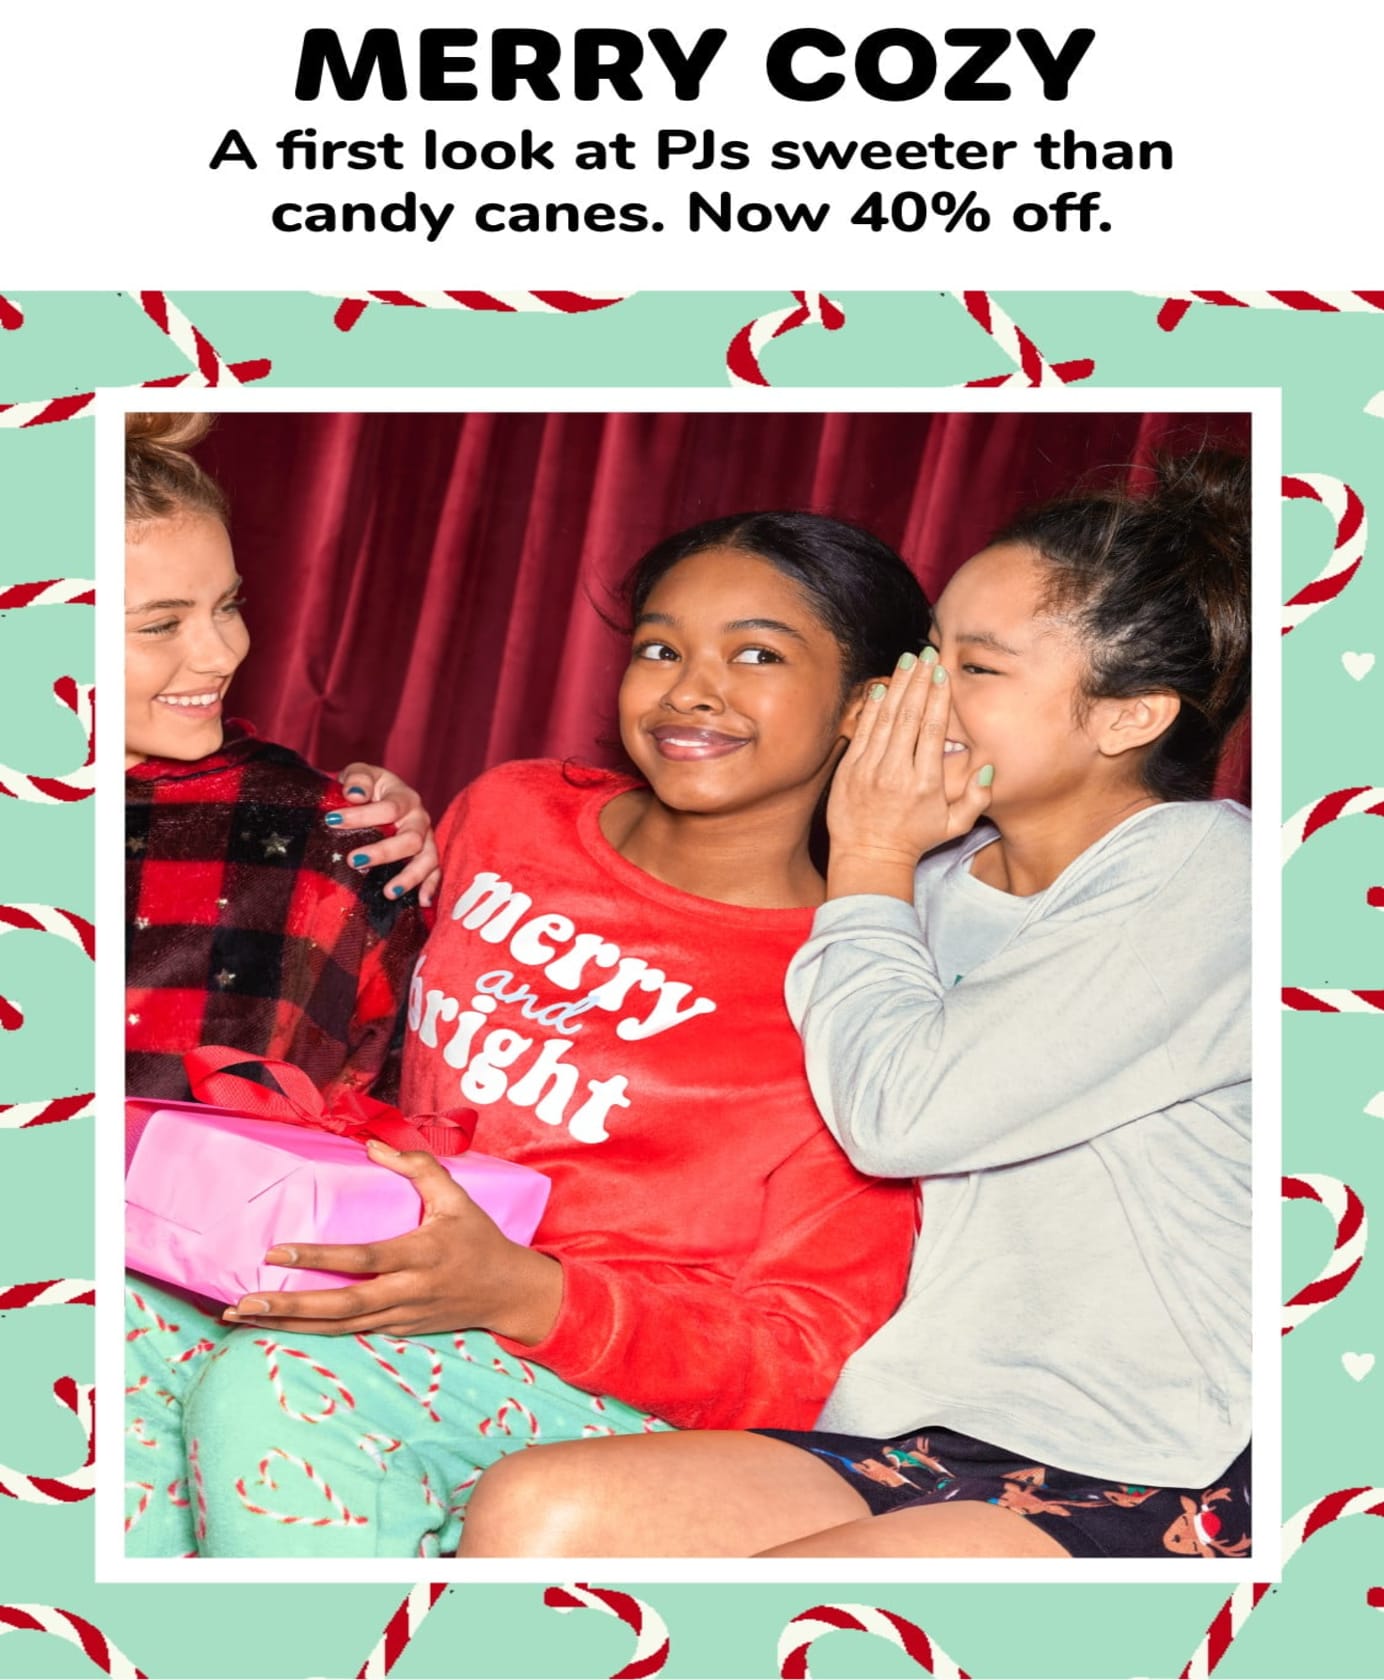 MERRY COZY A first look at PJs sweeter than candy canes. Now 40% off.